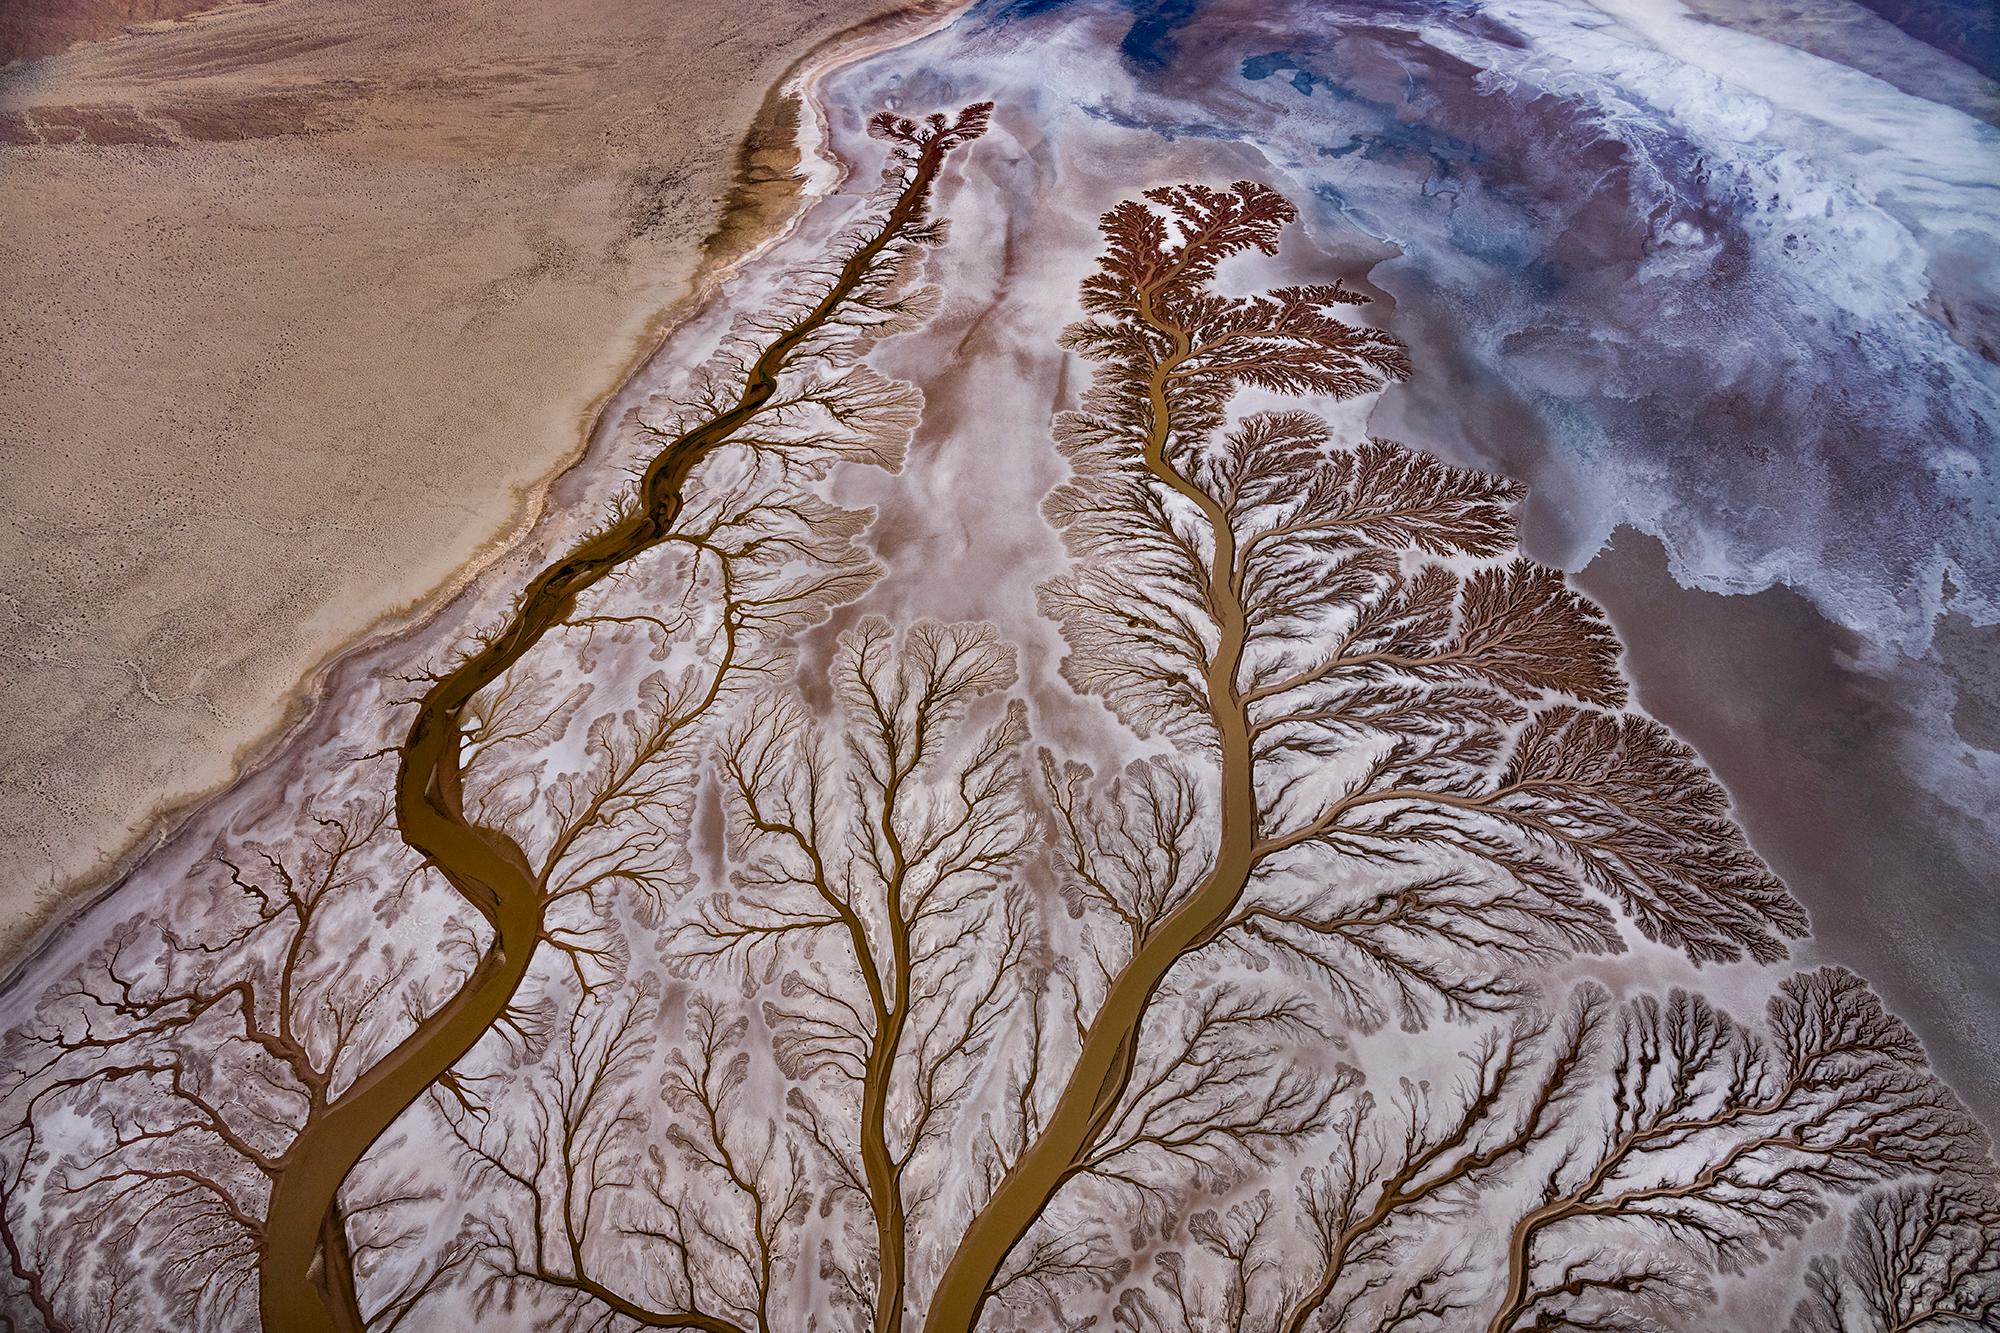 “Gaia’s Lungs” from the Delta Series 
Mexico, 2022

Available sizes:

24 × 36 in / Edition of 20
31 × 46.5 in / Edition of 15
40 × 60 in / Edition of 10 - $12,500
60 × 90 in / Edition of 7

"The Colorado River begins just south of the continental